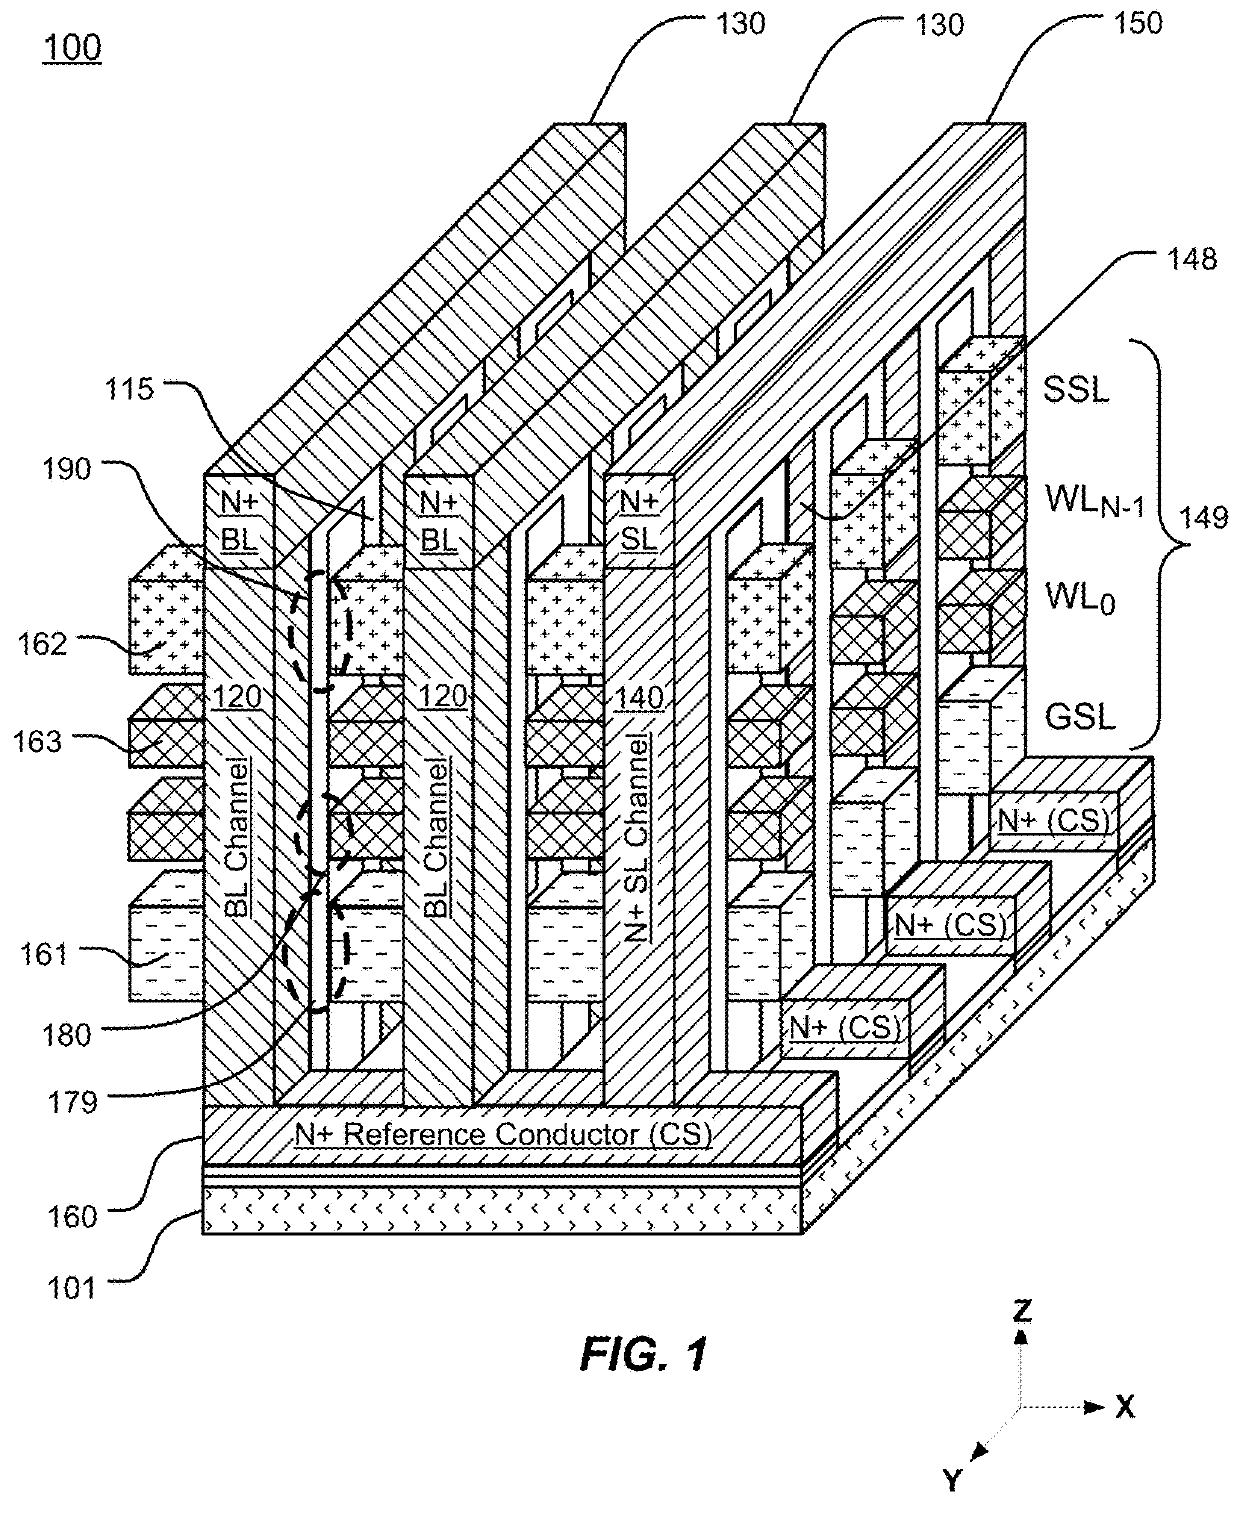 Method for manufacturing 3D NAND memory using gate replacement, and resulting structures